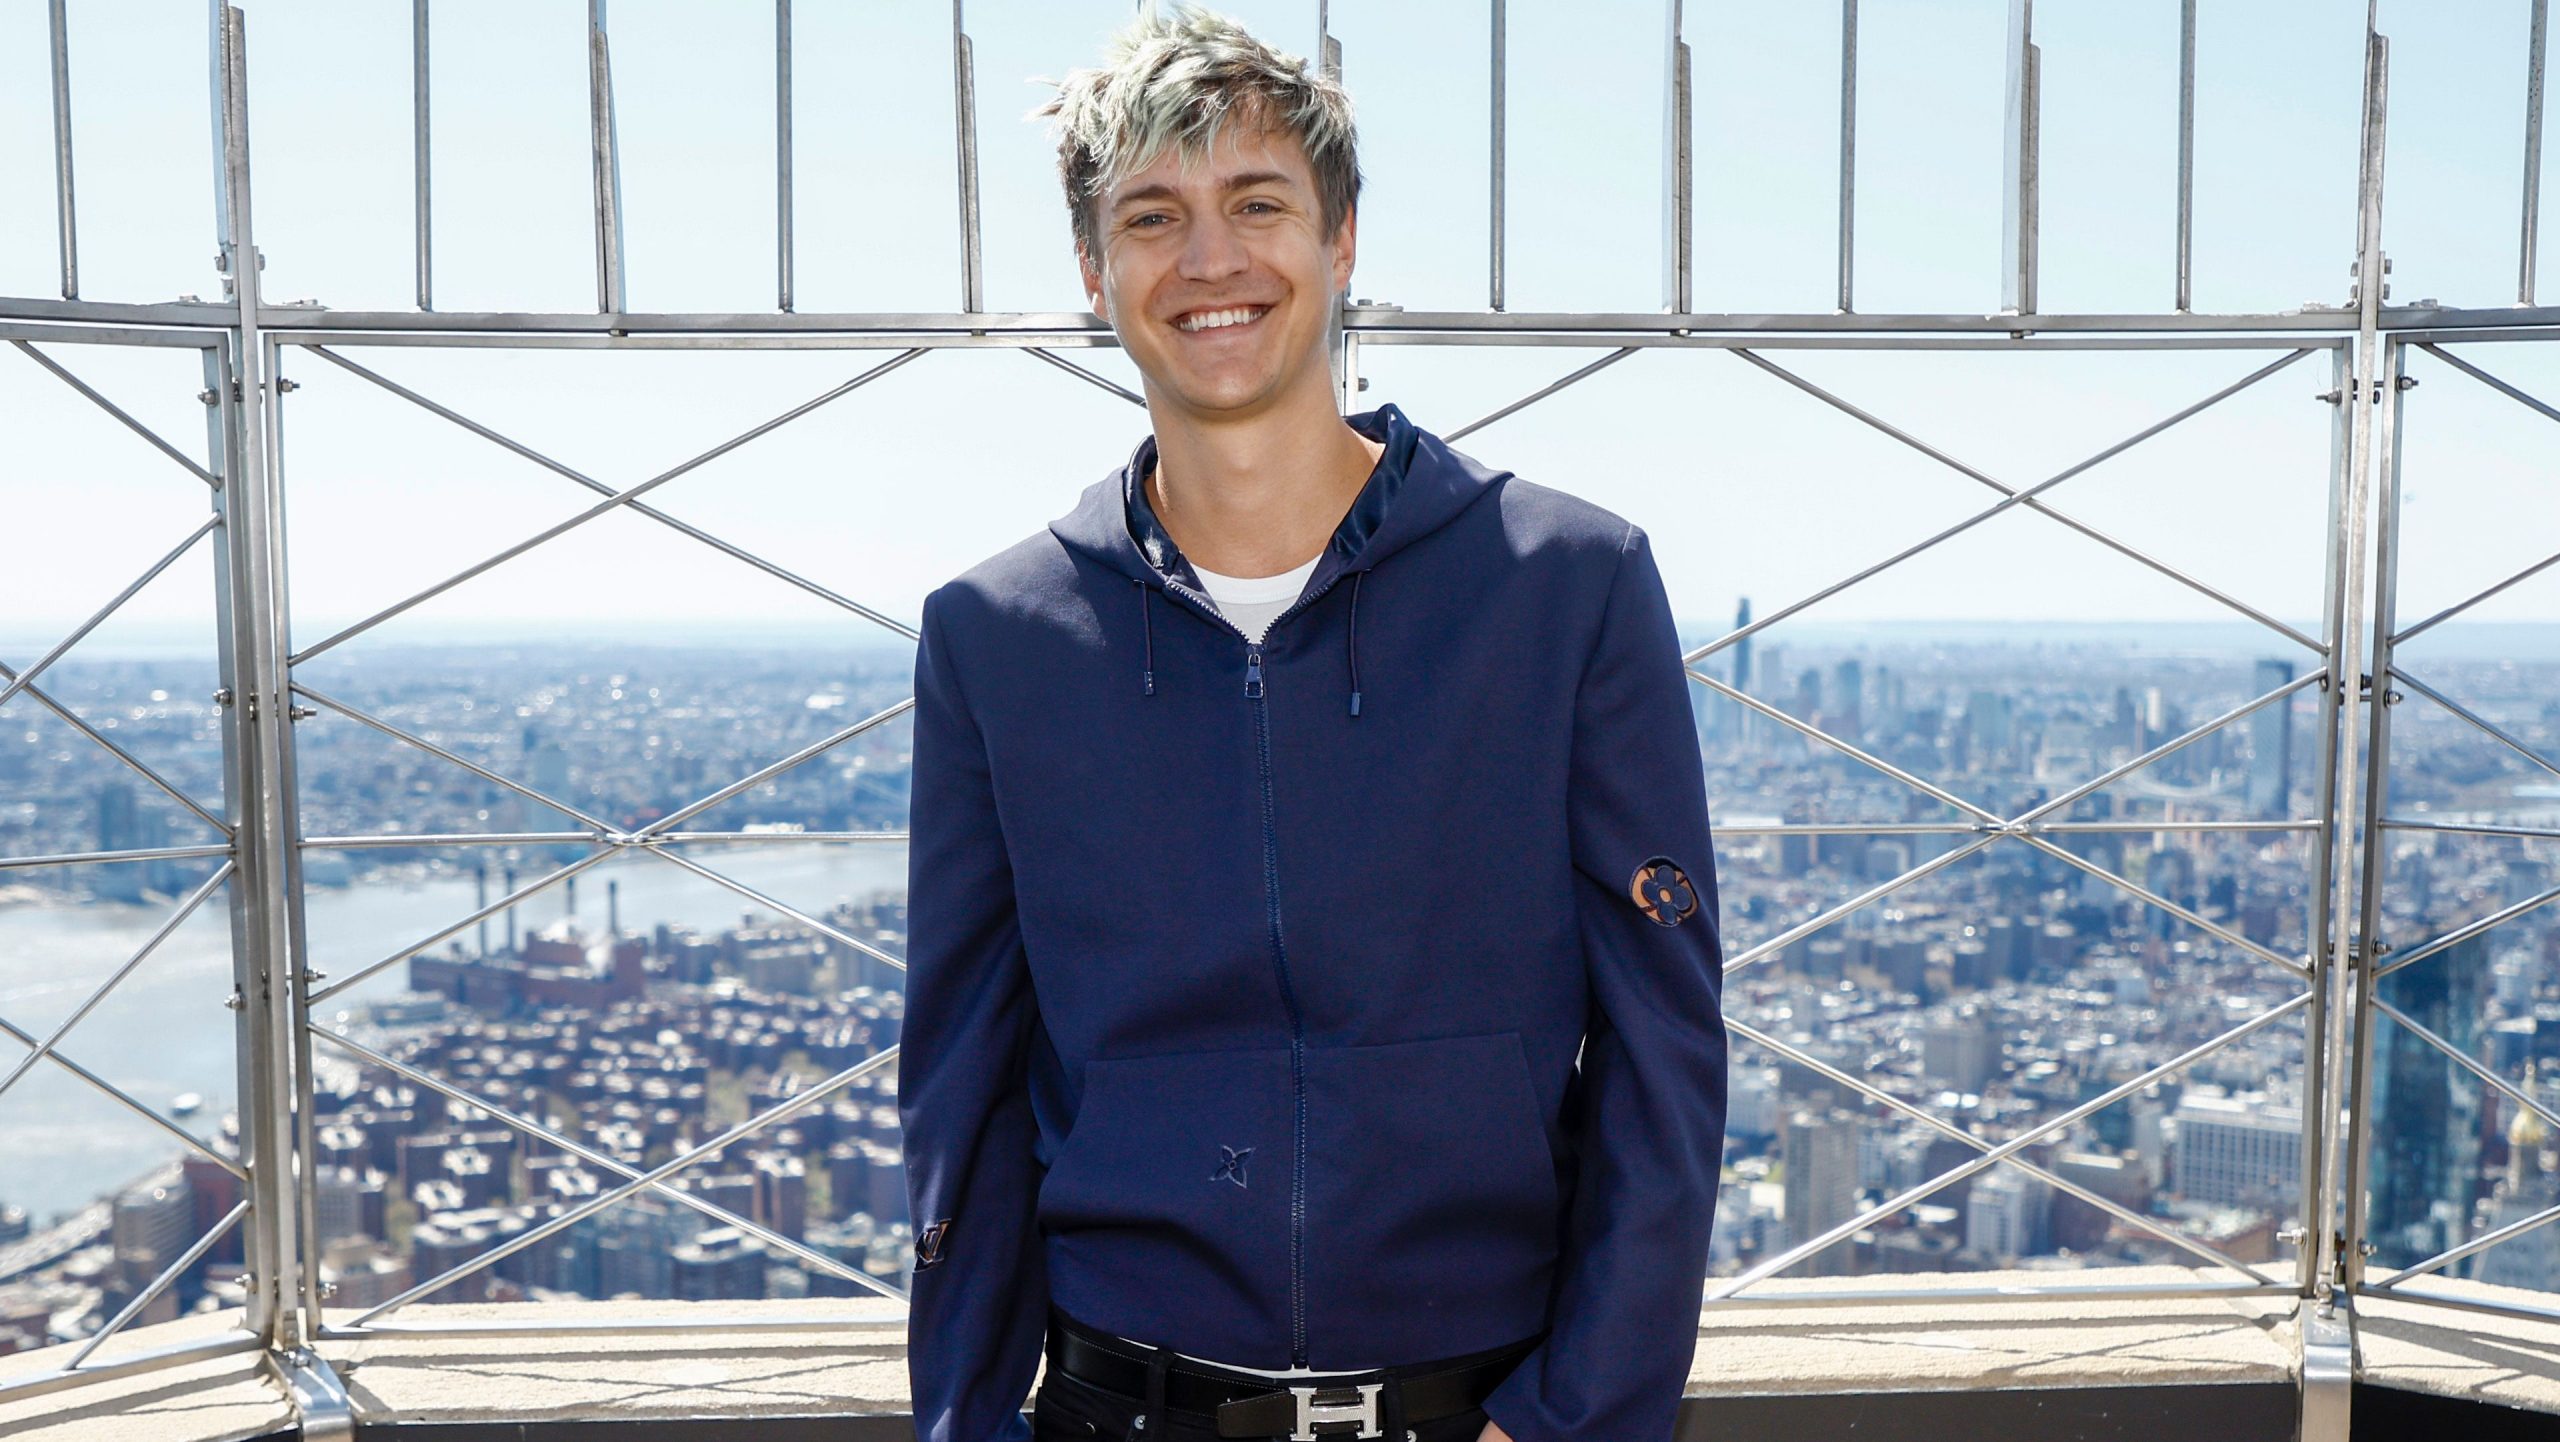 Ninja reveals skin cancer diagnosis: ‘Please take this as a PSA to get skin checkups’